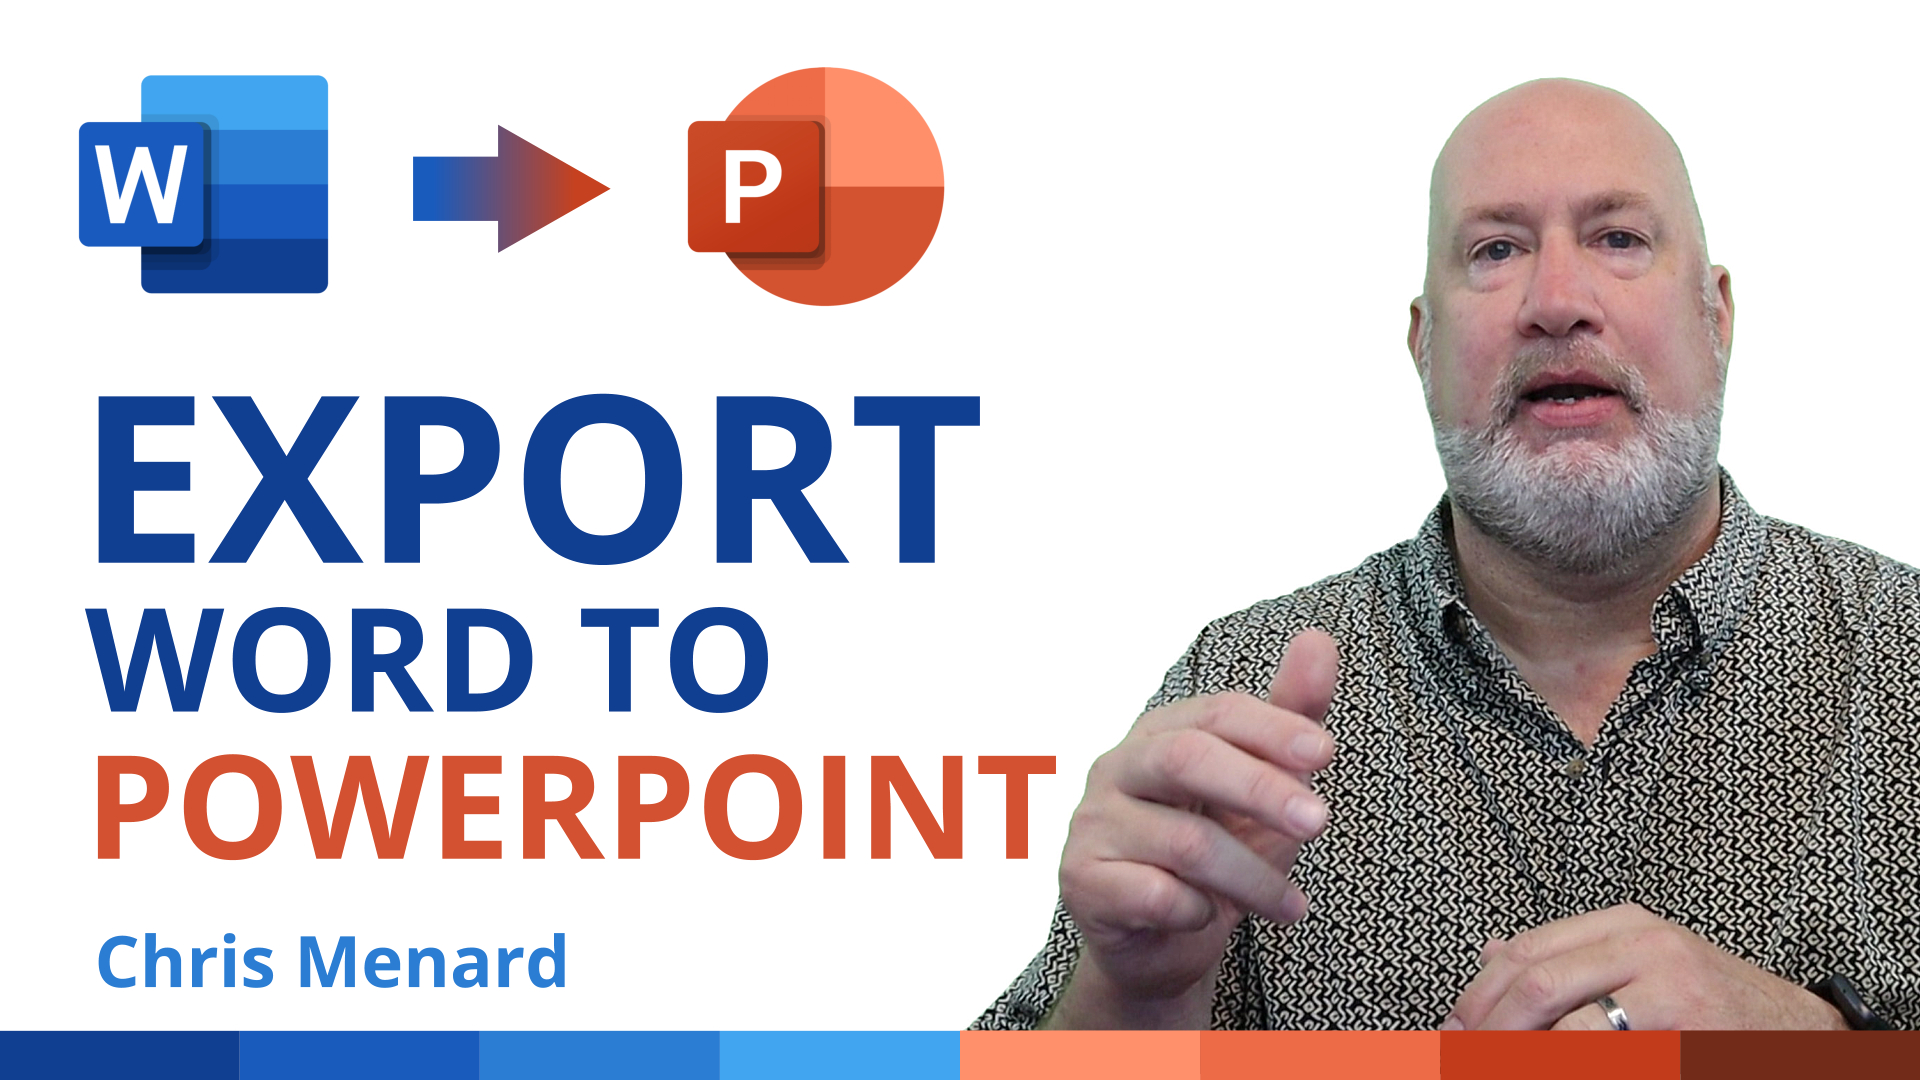 Export Word to PowerPoint with a few clicks - New Feature from Microsoft